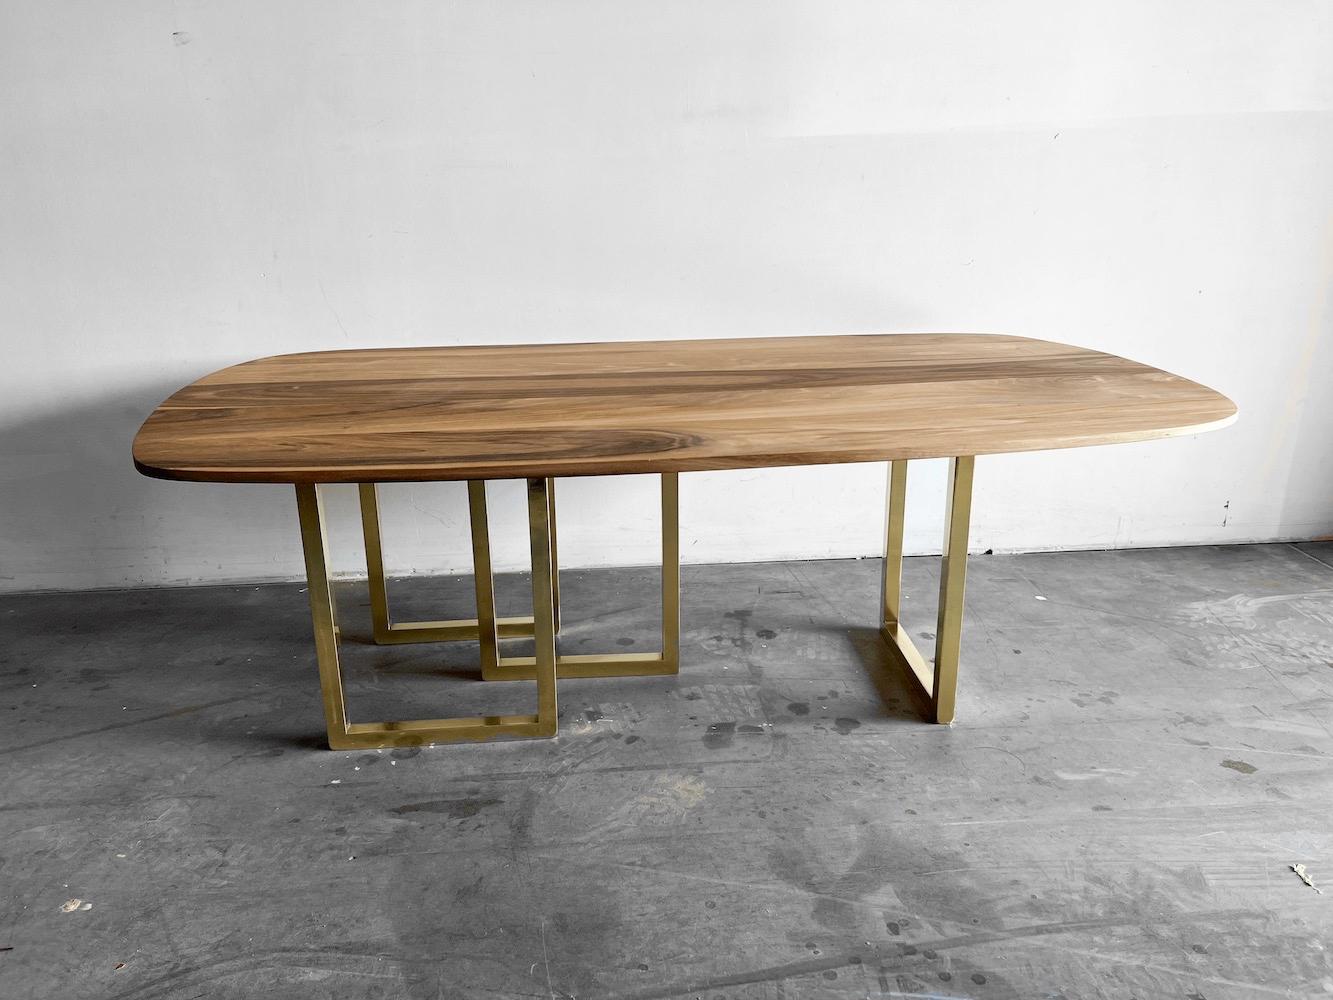 The Doors coffee table features a sleek design and is part of the Seve Quantum Design tabletop and board games collection. This piece has been crafted entirely by hand. The wood, which originates from a sustainably managed forest, has been chosen